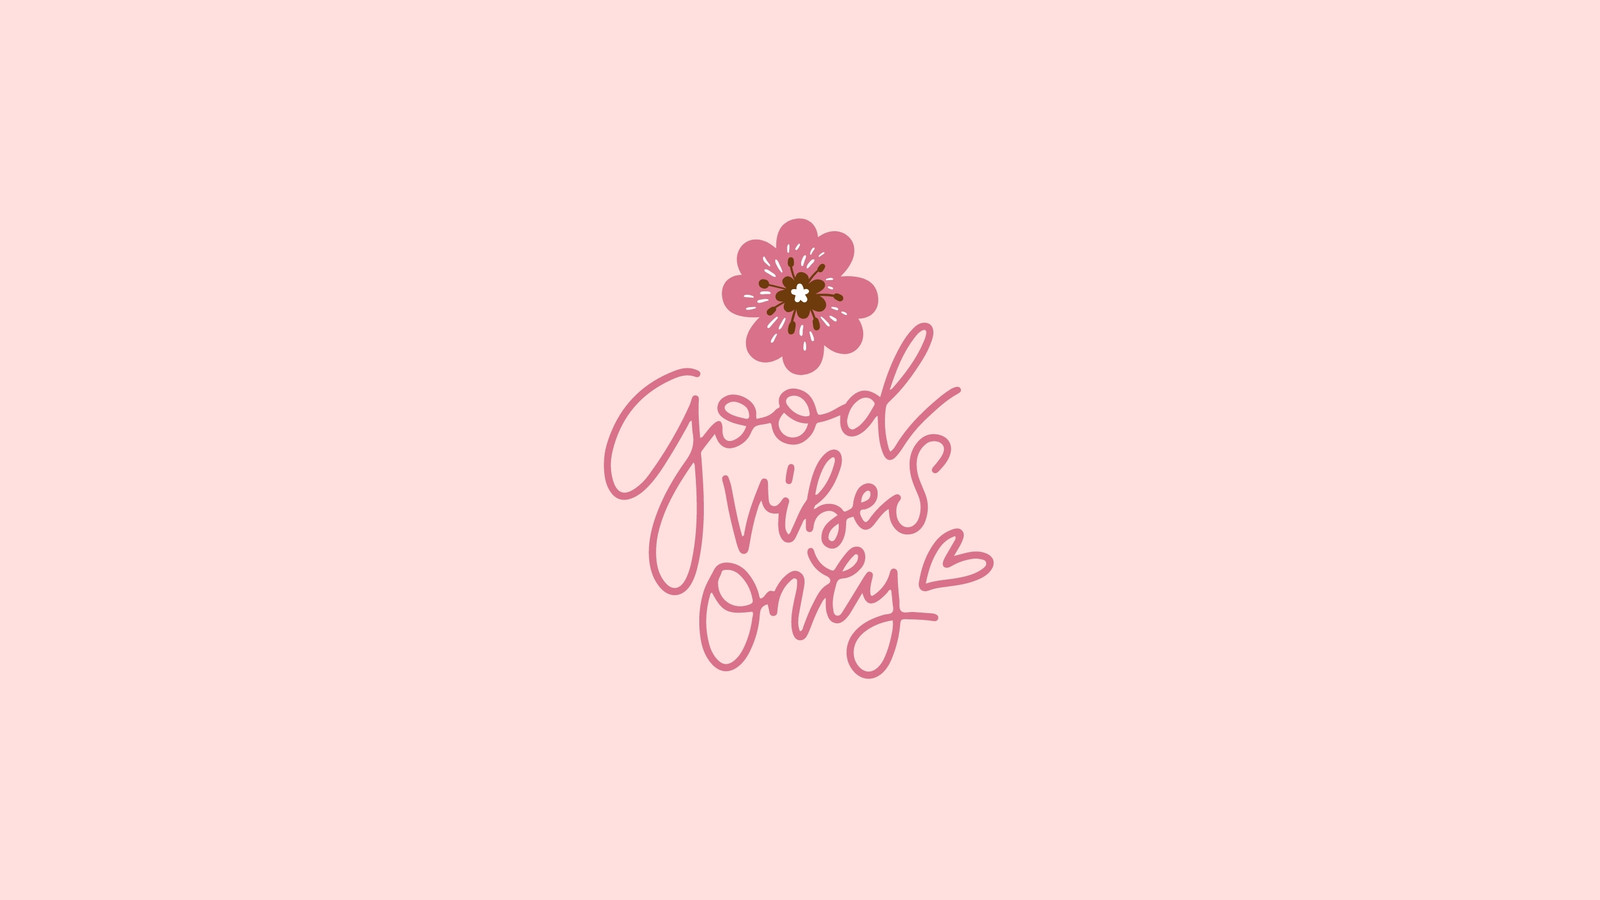 Good vibes only, lettering with a flower on a pink background - Pastel minimalist